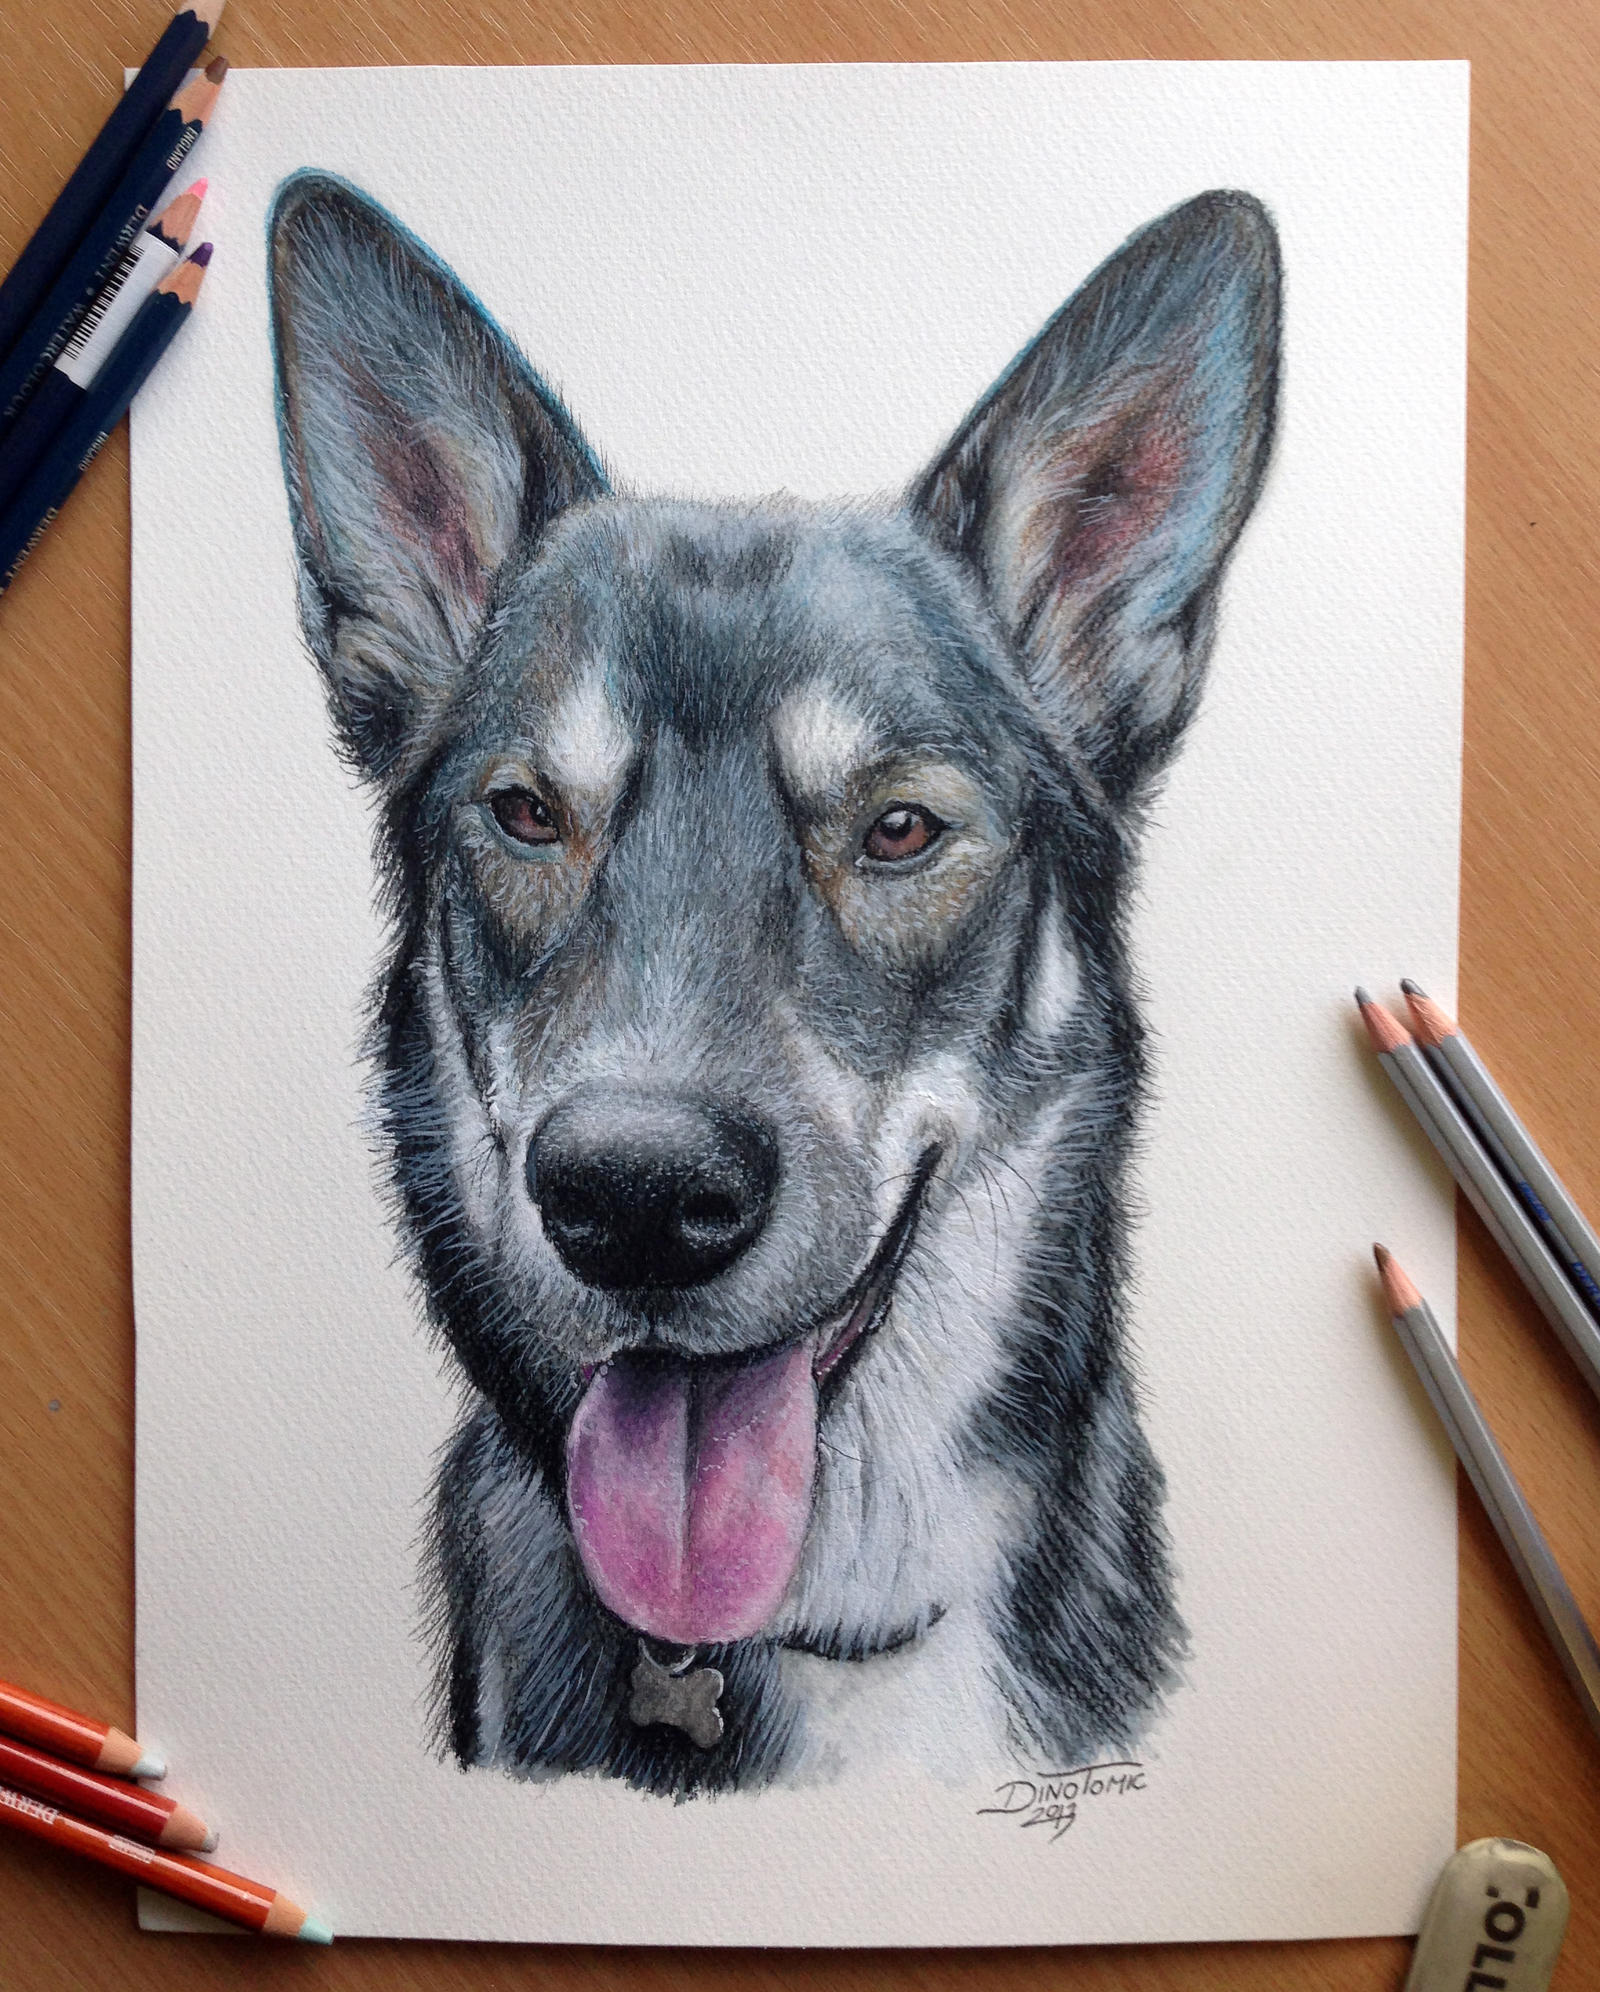 Pencil drawing of a Dog by AtomiccircuS on DeviantArt